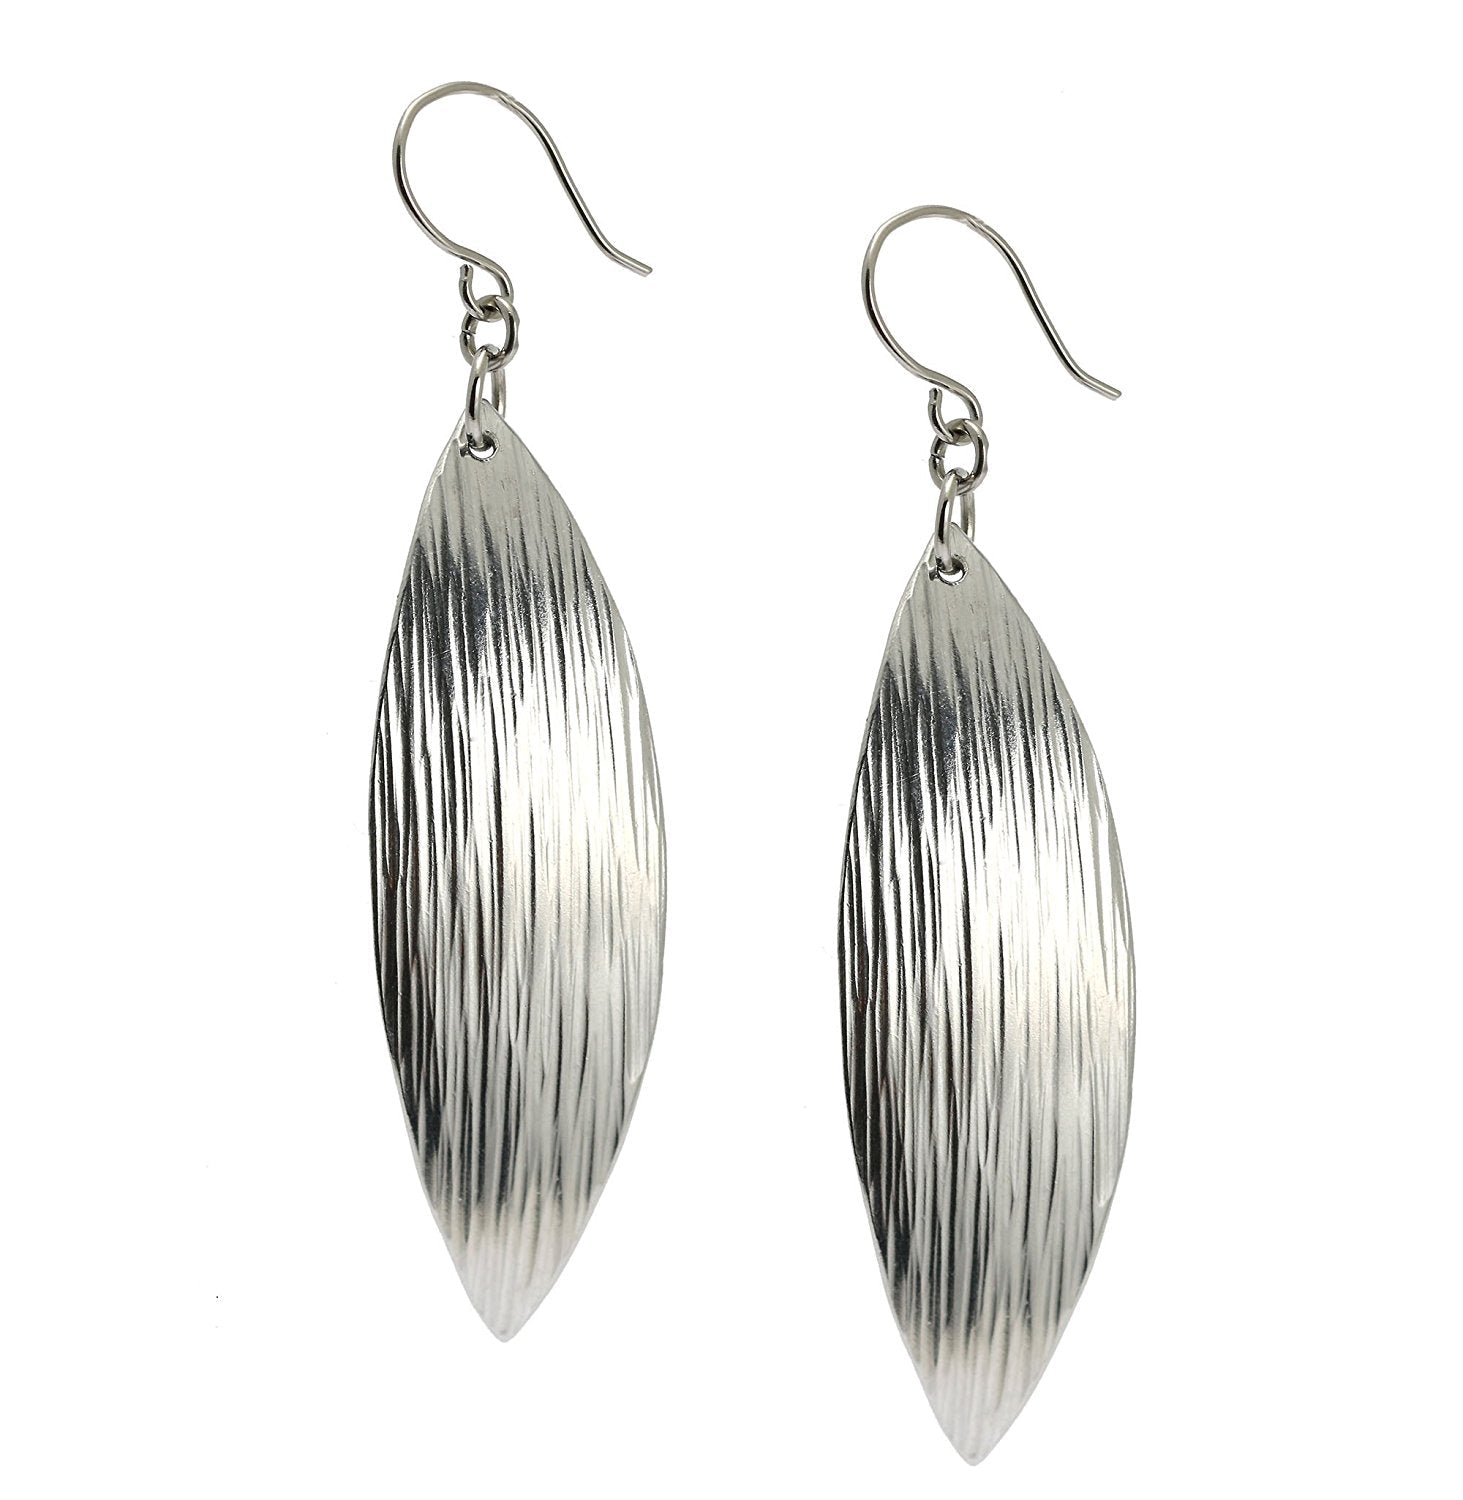 Detail View of Chased Aluminum Leaf Drop Earrings